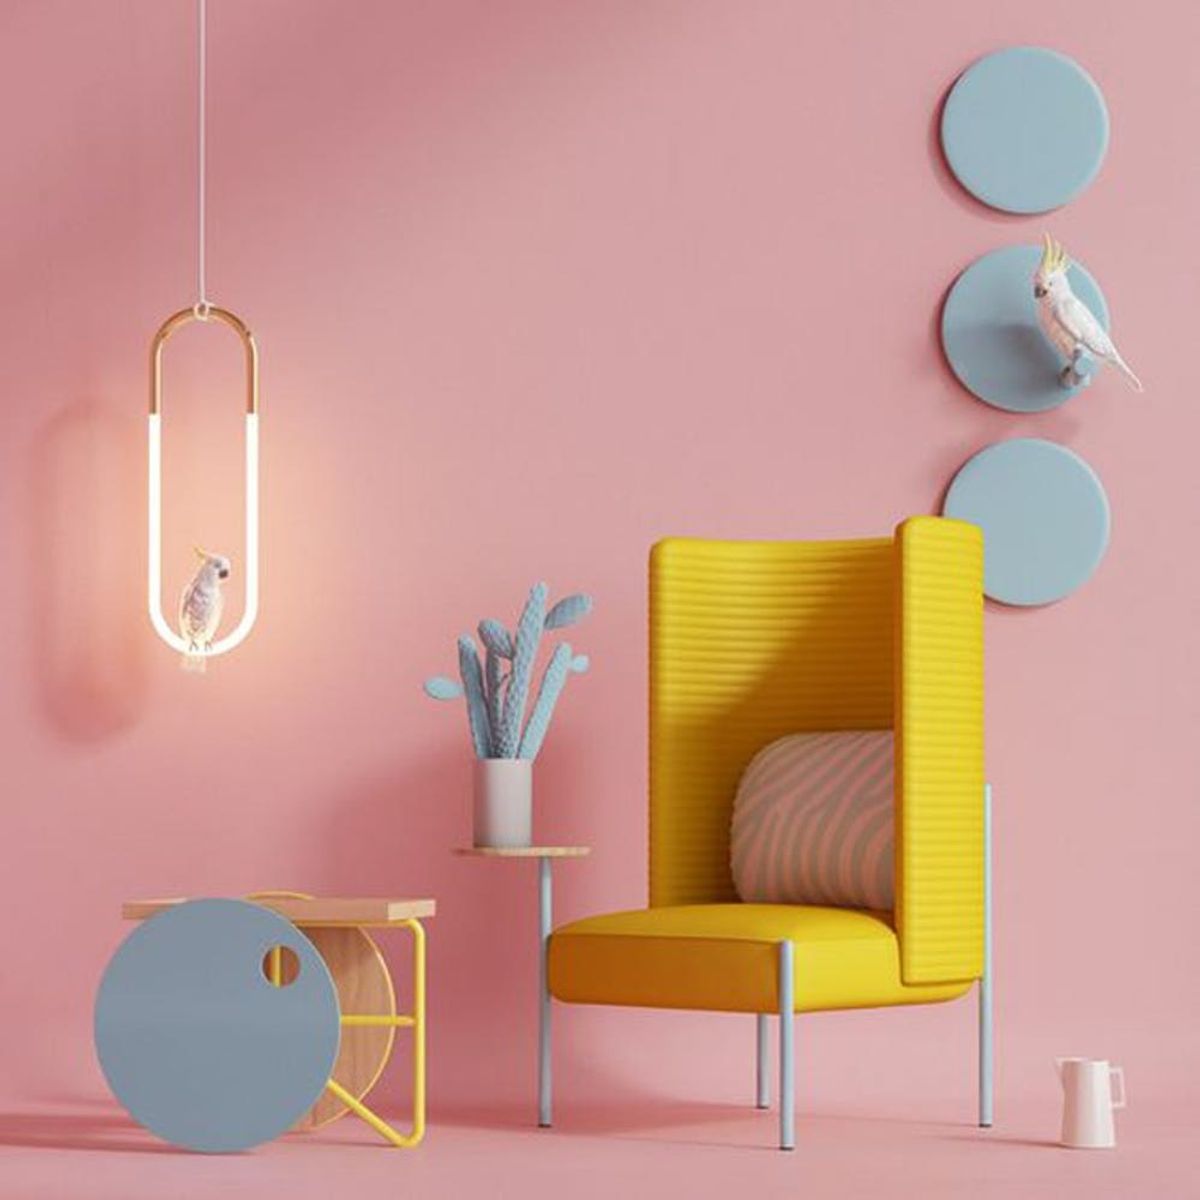 14 On-Trend Ways to Decorate With Pantone’s Spring 2018 Color Palette